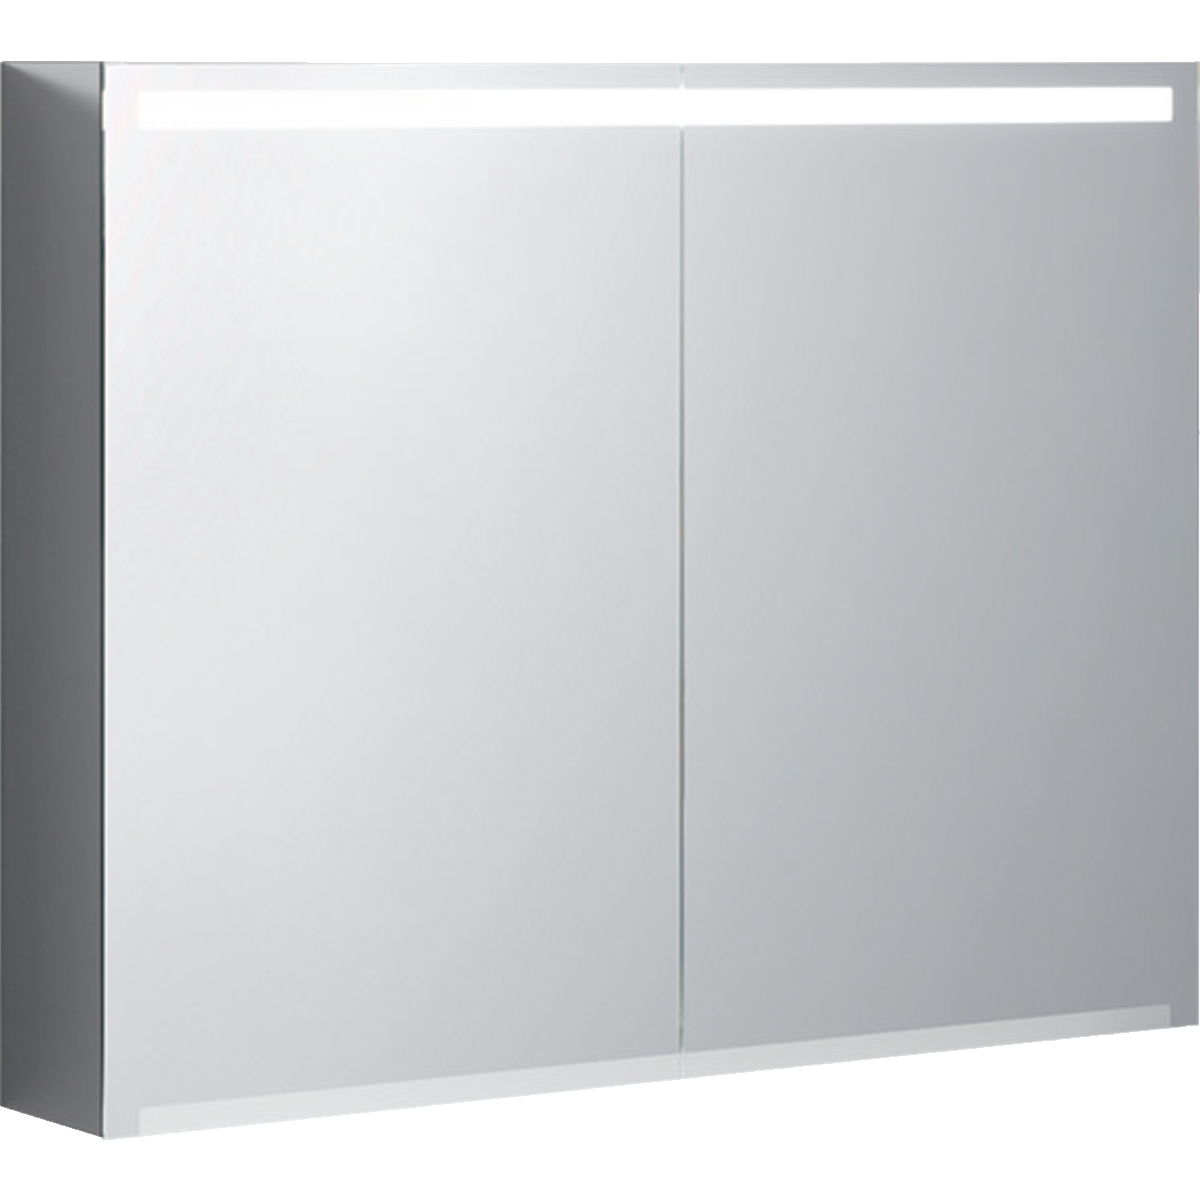 Option mirror cabinet with lighting and two doors - 900mm